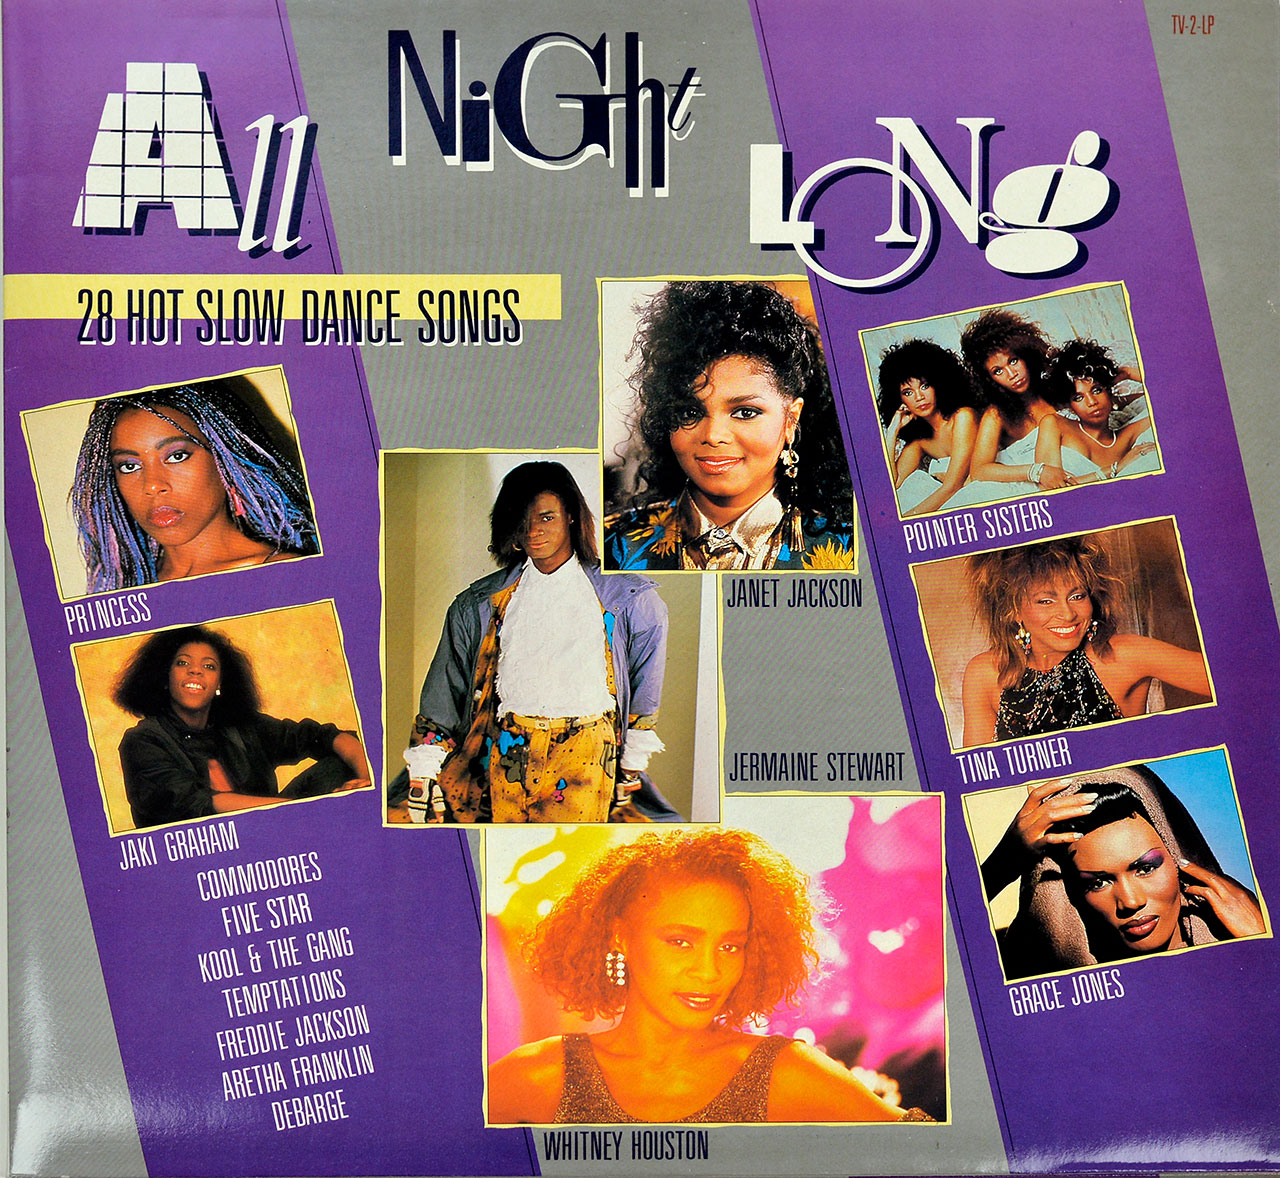 Album Front Cover Photo of VARIOUS ARTISTS - All Night Long 